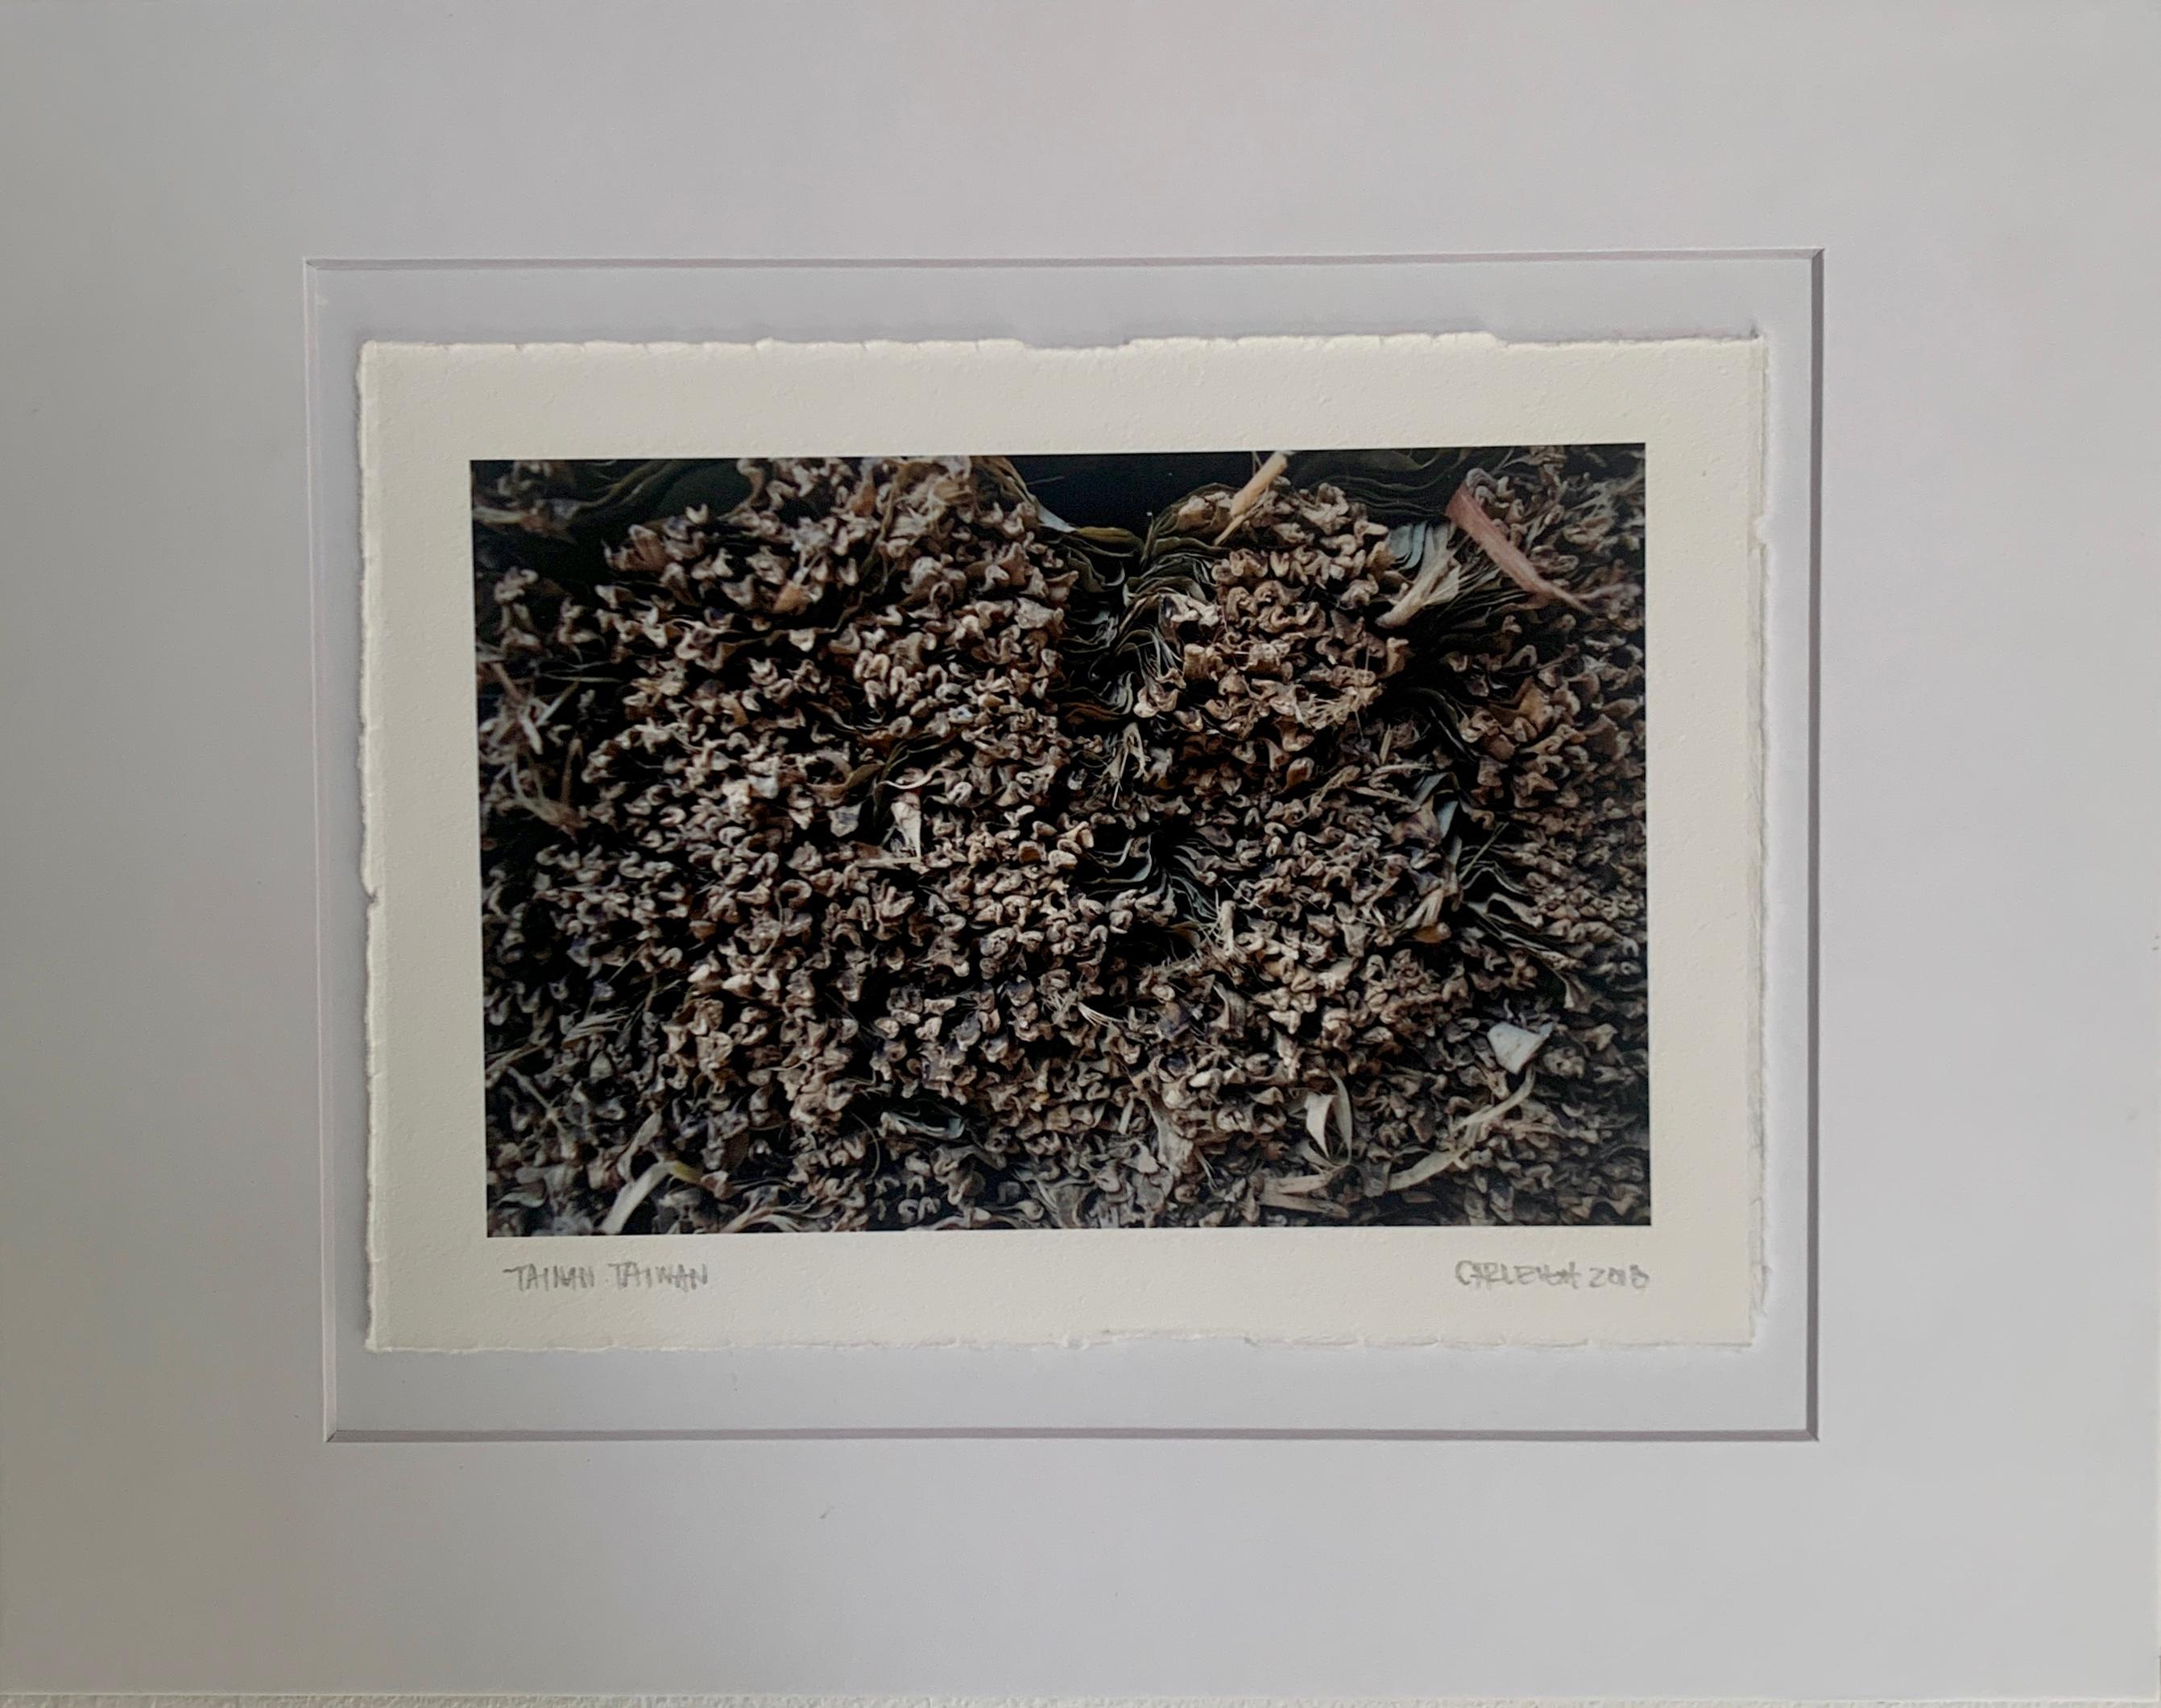 NOW WE'RE HERE - Print on Handmade Paper - Tainan, Taiwan, Earthy, Nature, Brown - Photograph by Carleigh Thomas